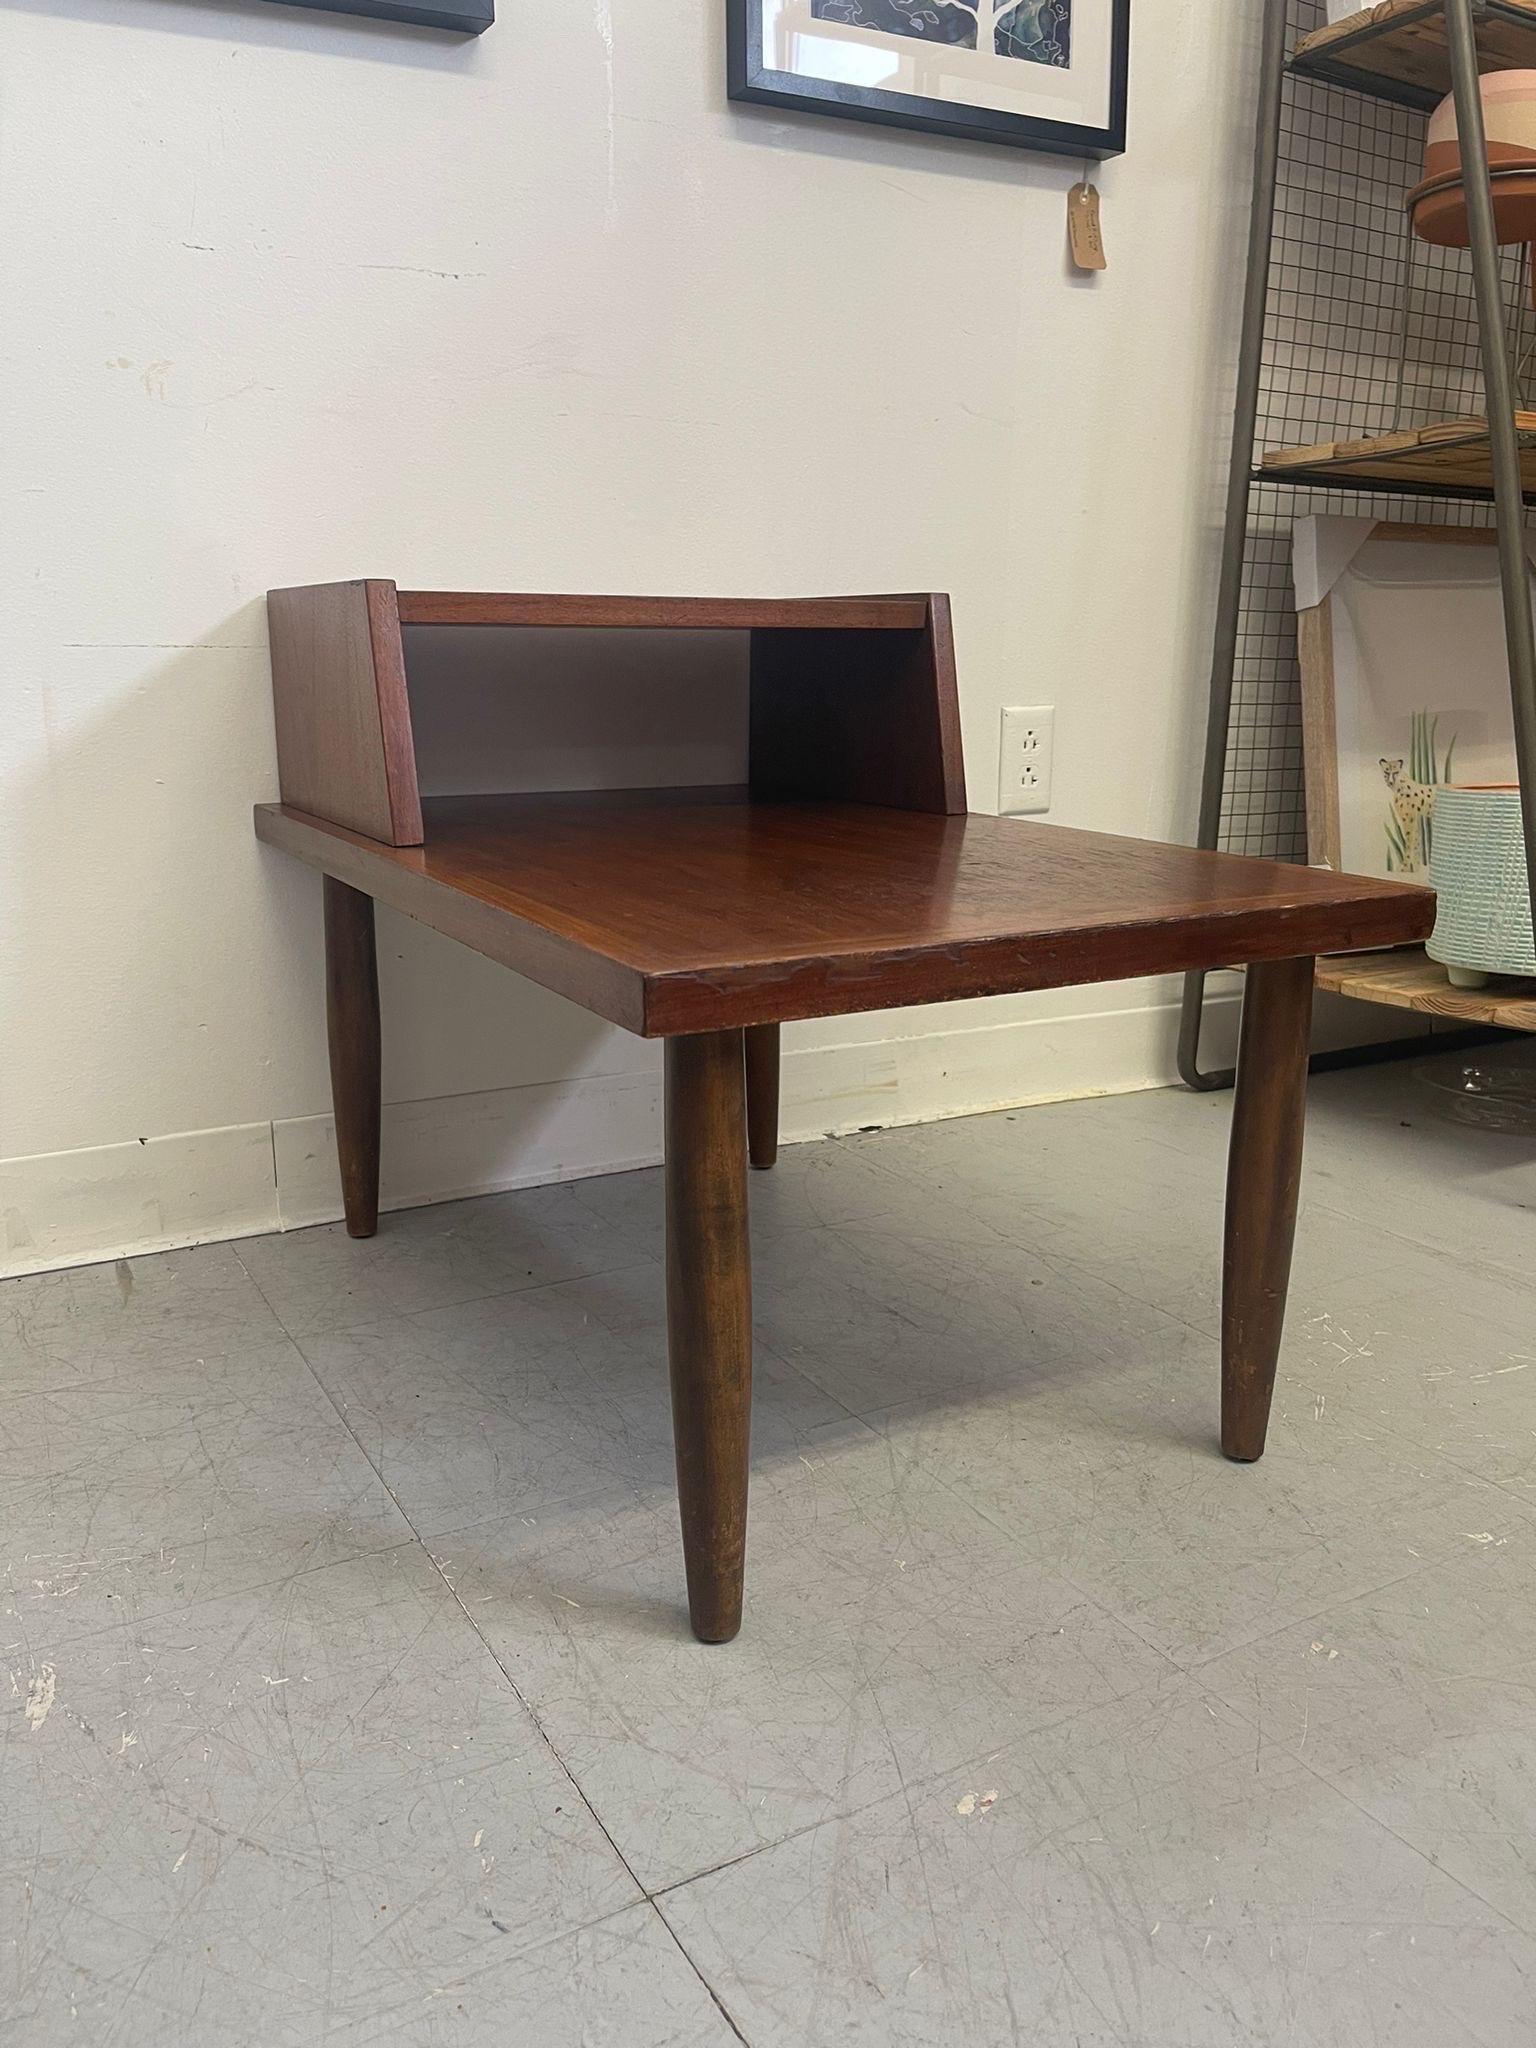 This accent table has sleek design and open shelving. Beautiful edge banding around the top of the piece. Tapered legs, no Makers mark. Vintage Condition Consistent with Age as Pictured.

Dimensions. 30 W ; 20 D ; 22 A